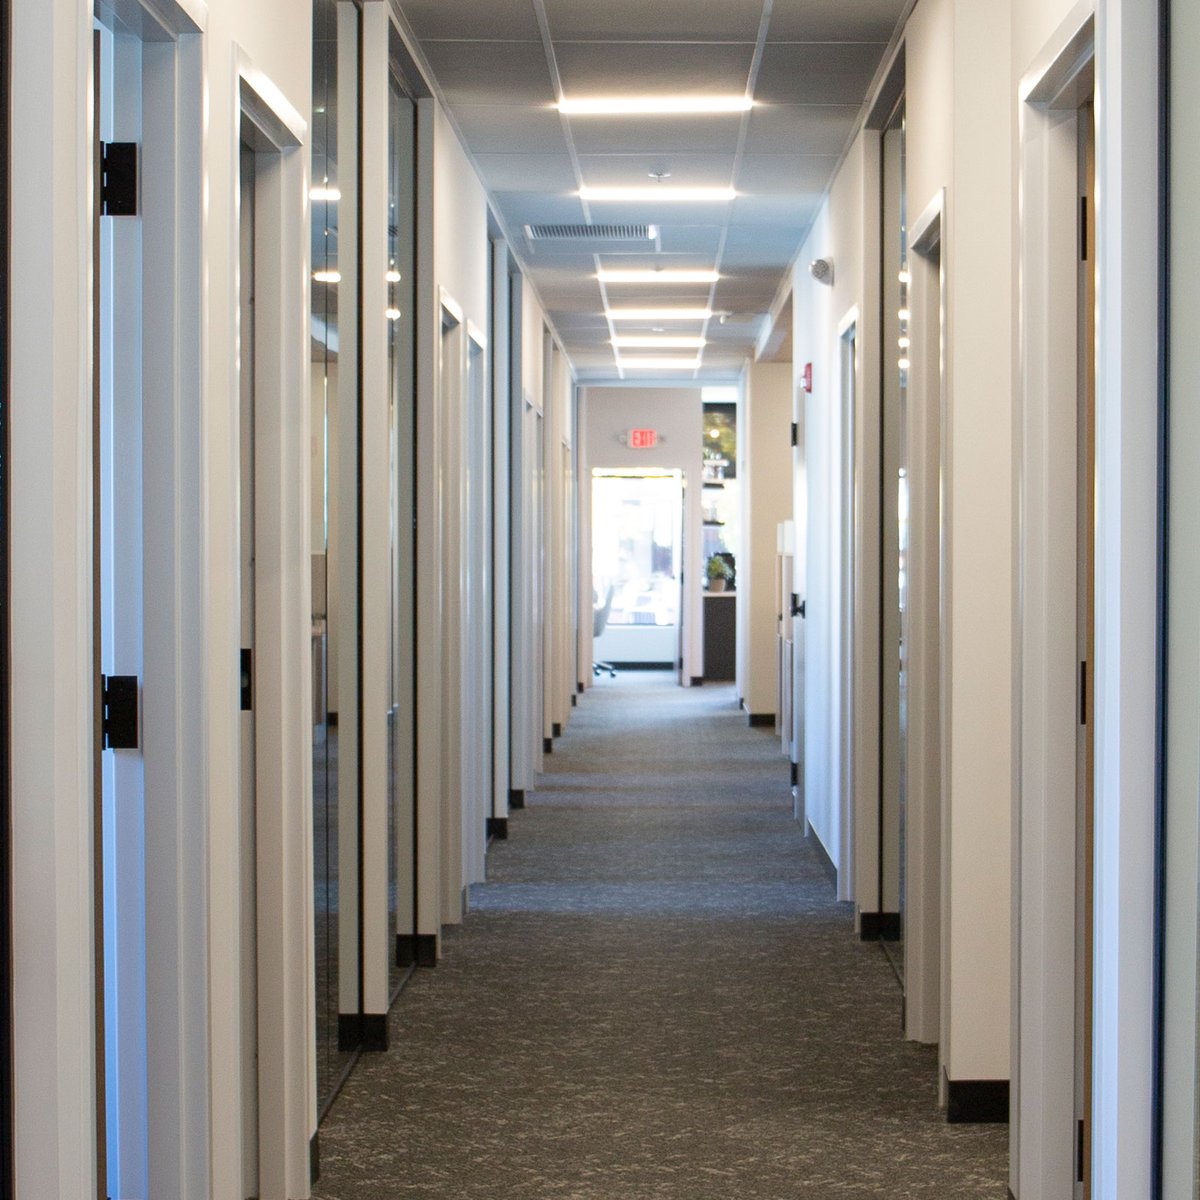 Hallway at a business with doors on the left and right